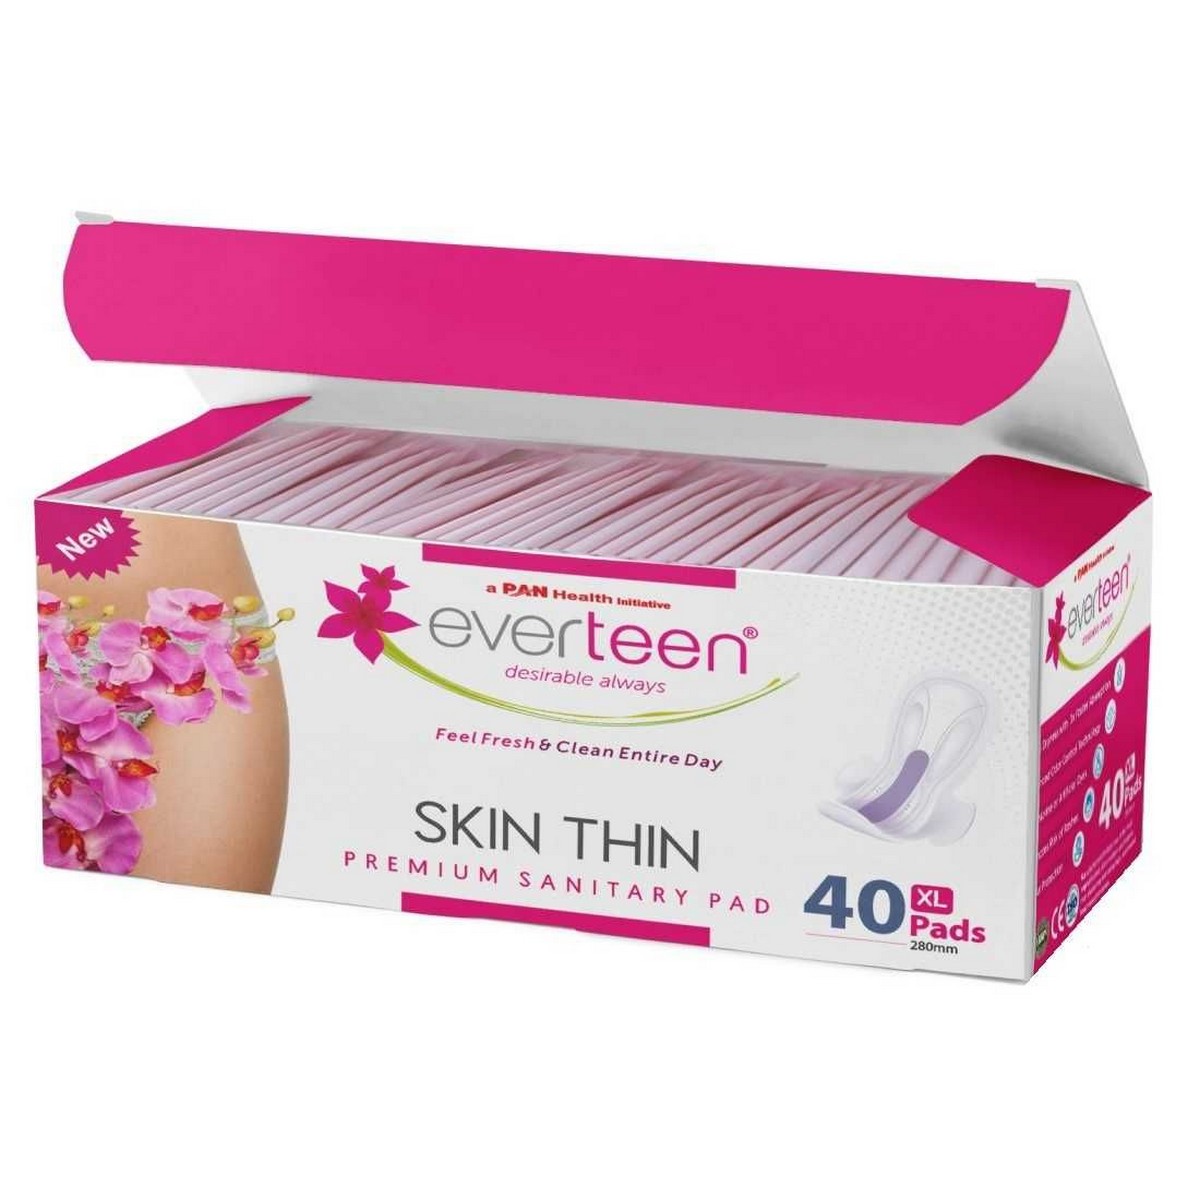 Everteen Skin Thin Premium XL Sanitary Pads 40Pieces  everteen SKIN THIN Premium XL Sanitary Pads for Protection During Periods in Women 1 Pack 40 Pads 280mm5